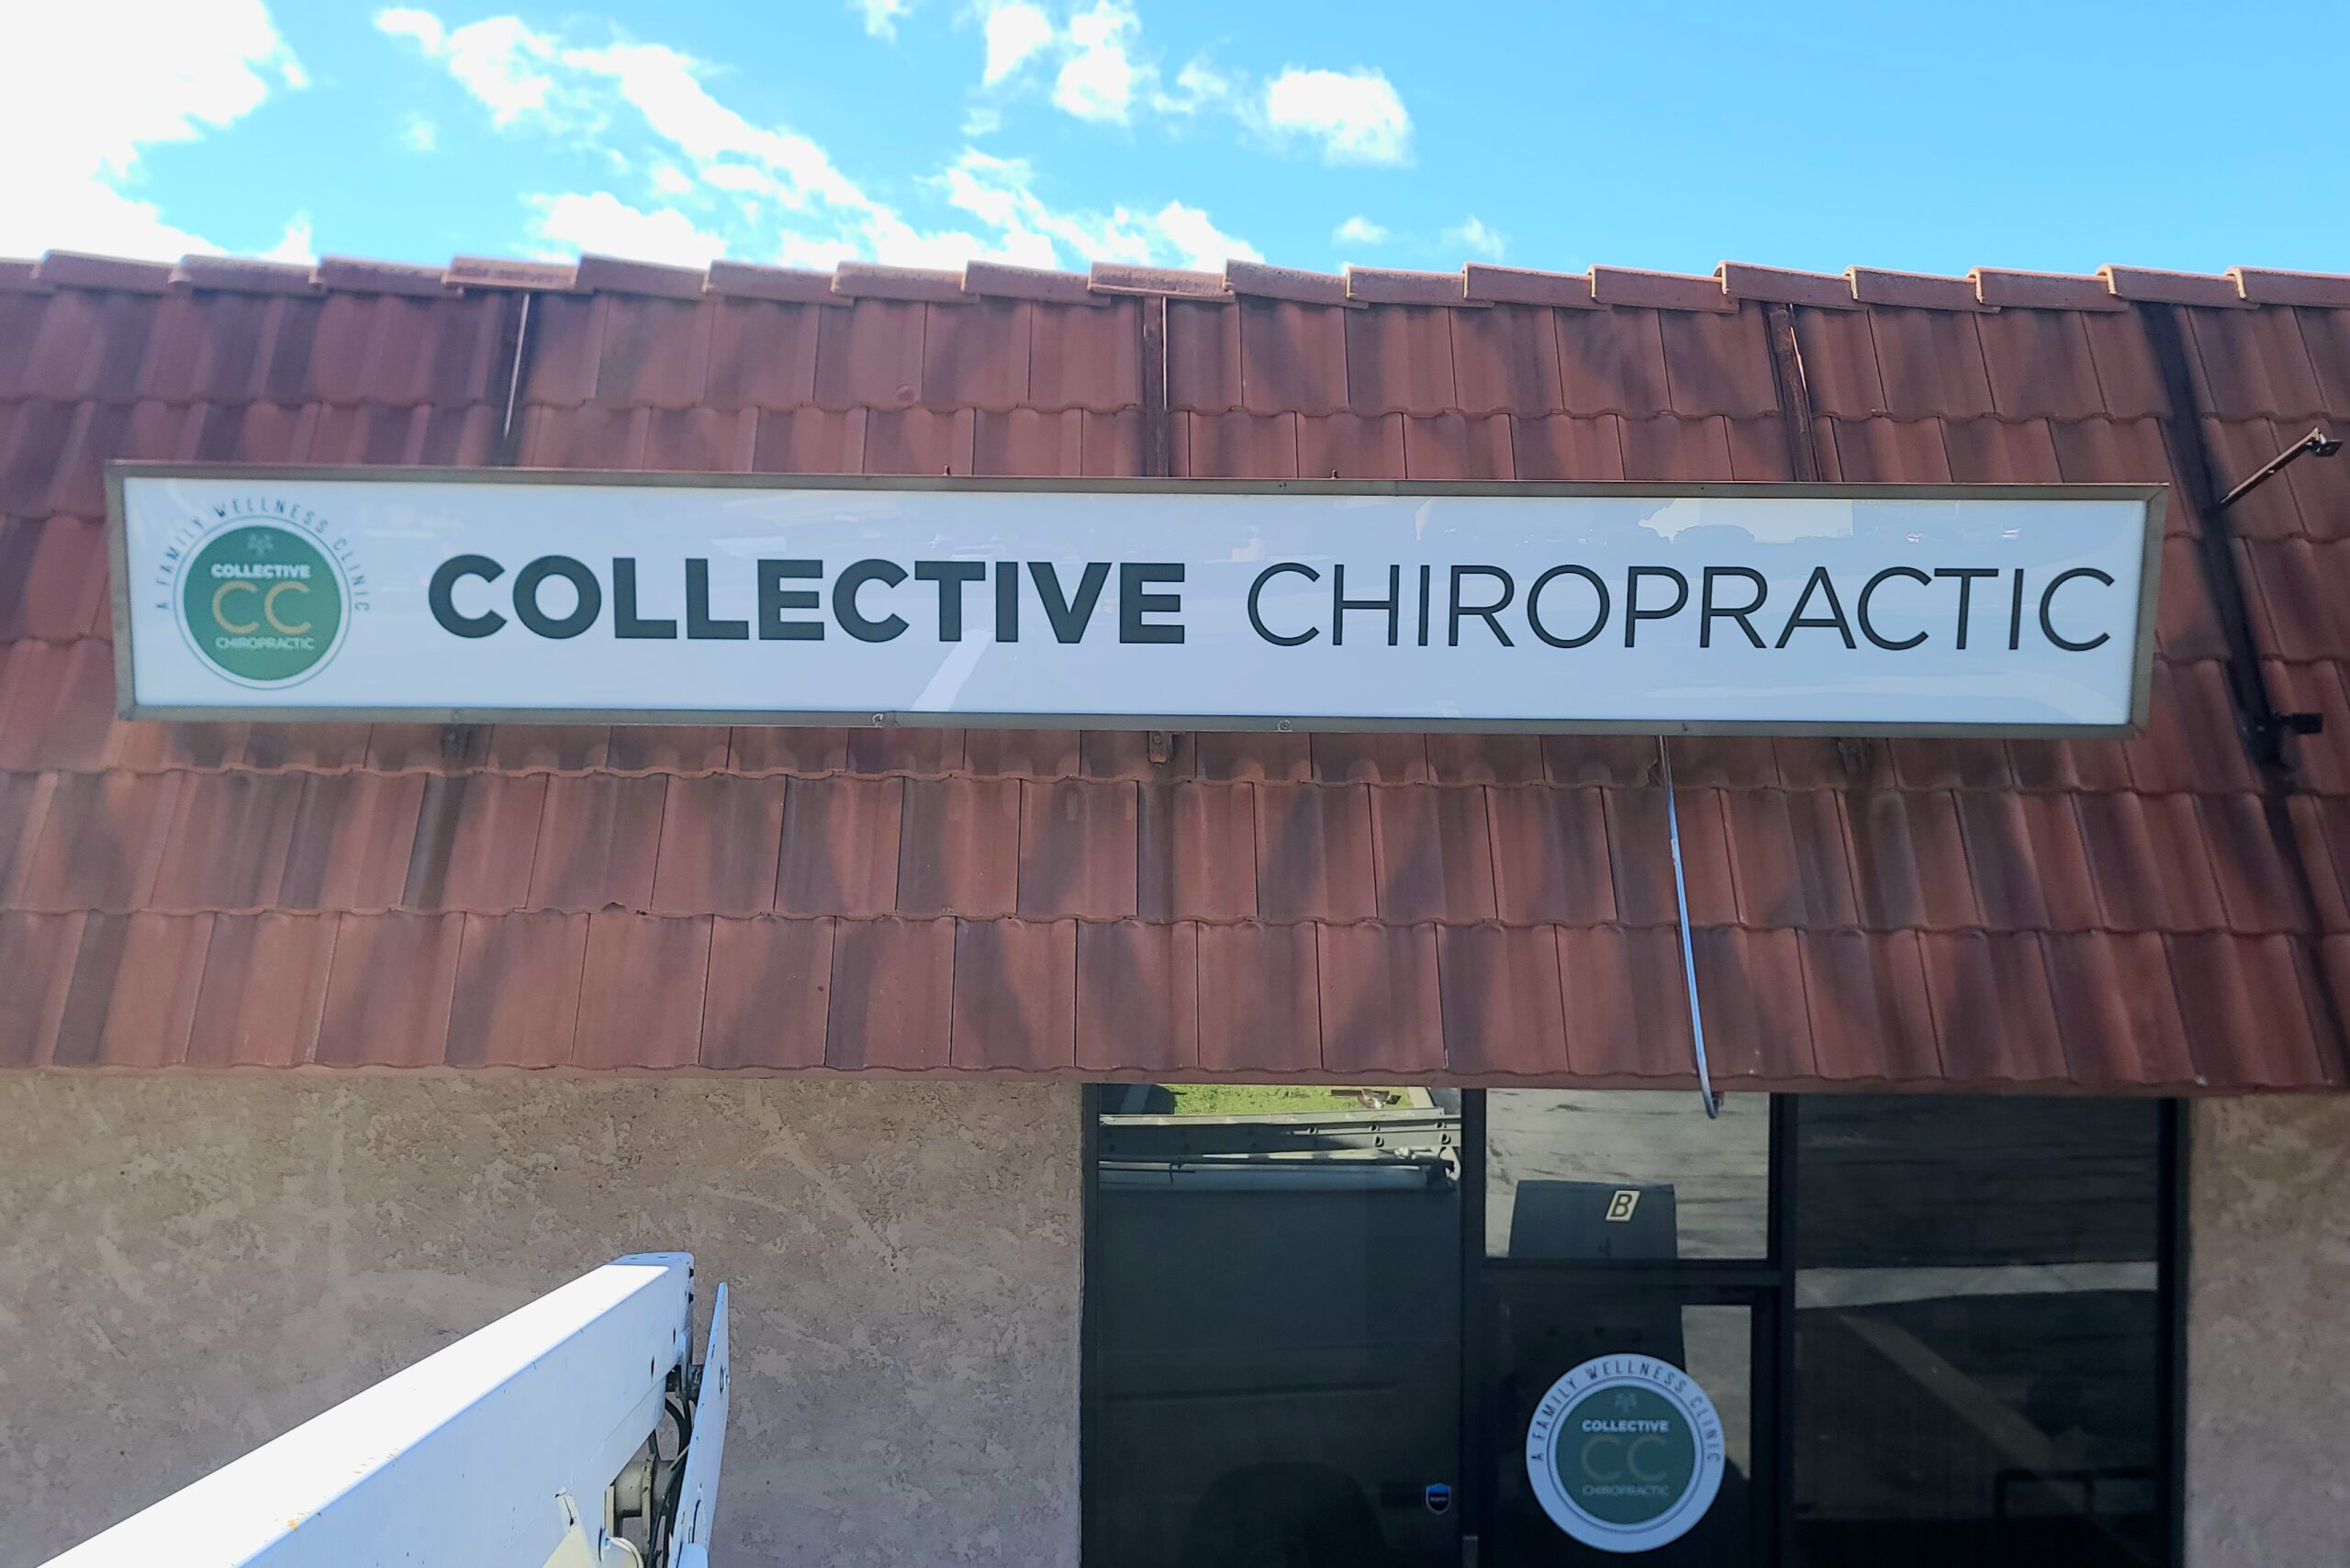 Vibrant lightbox sign promoting Collective Chiropractor